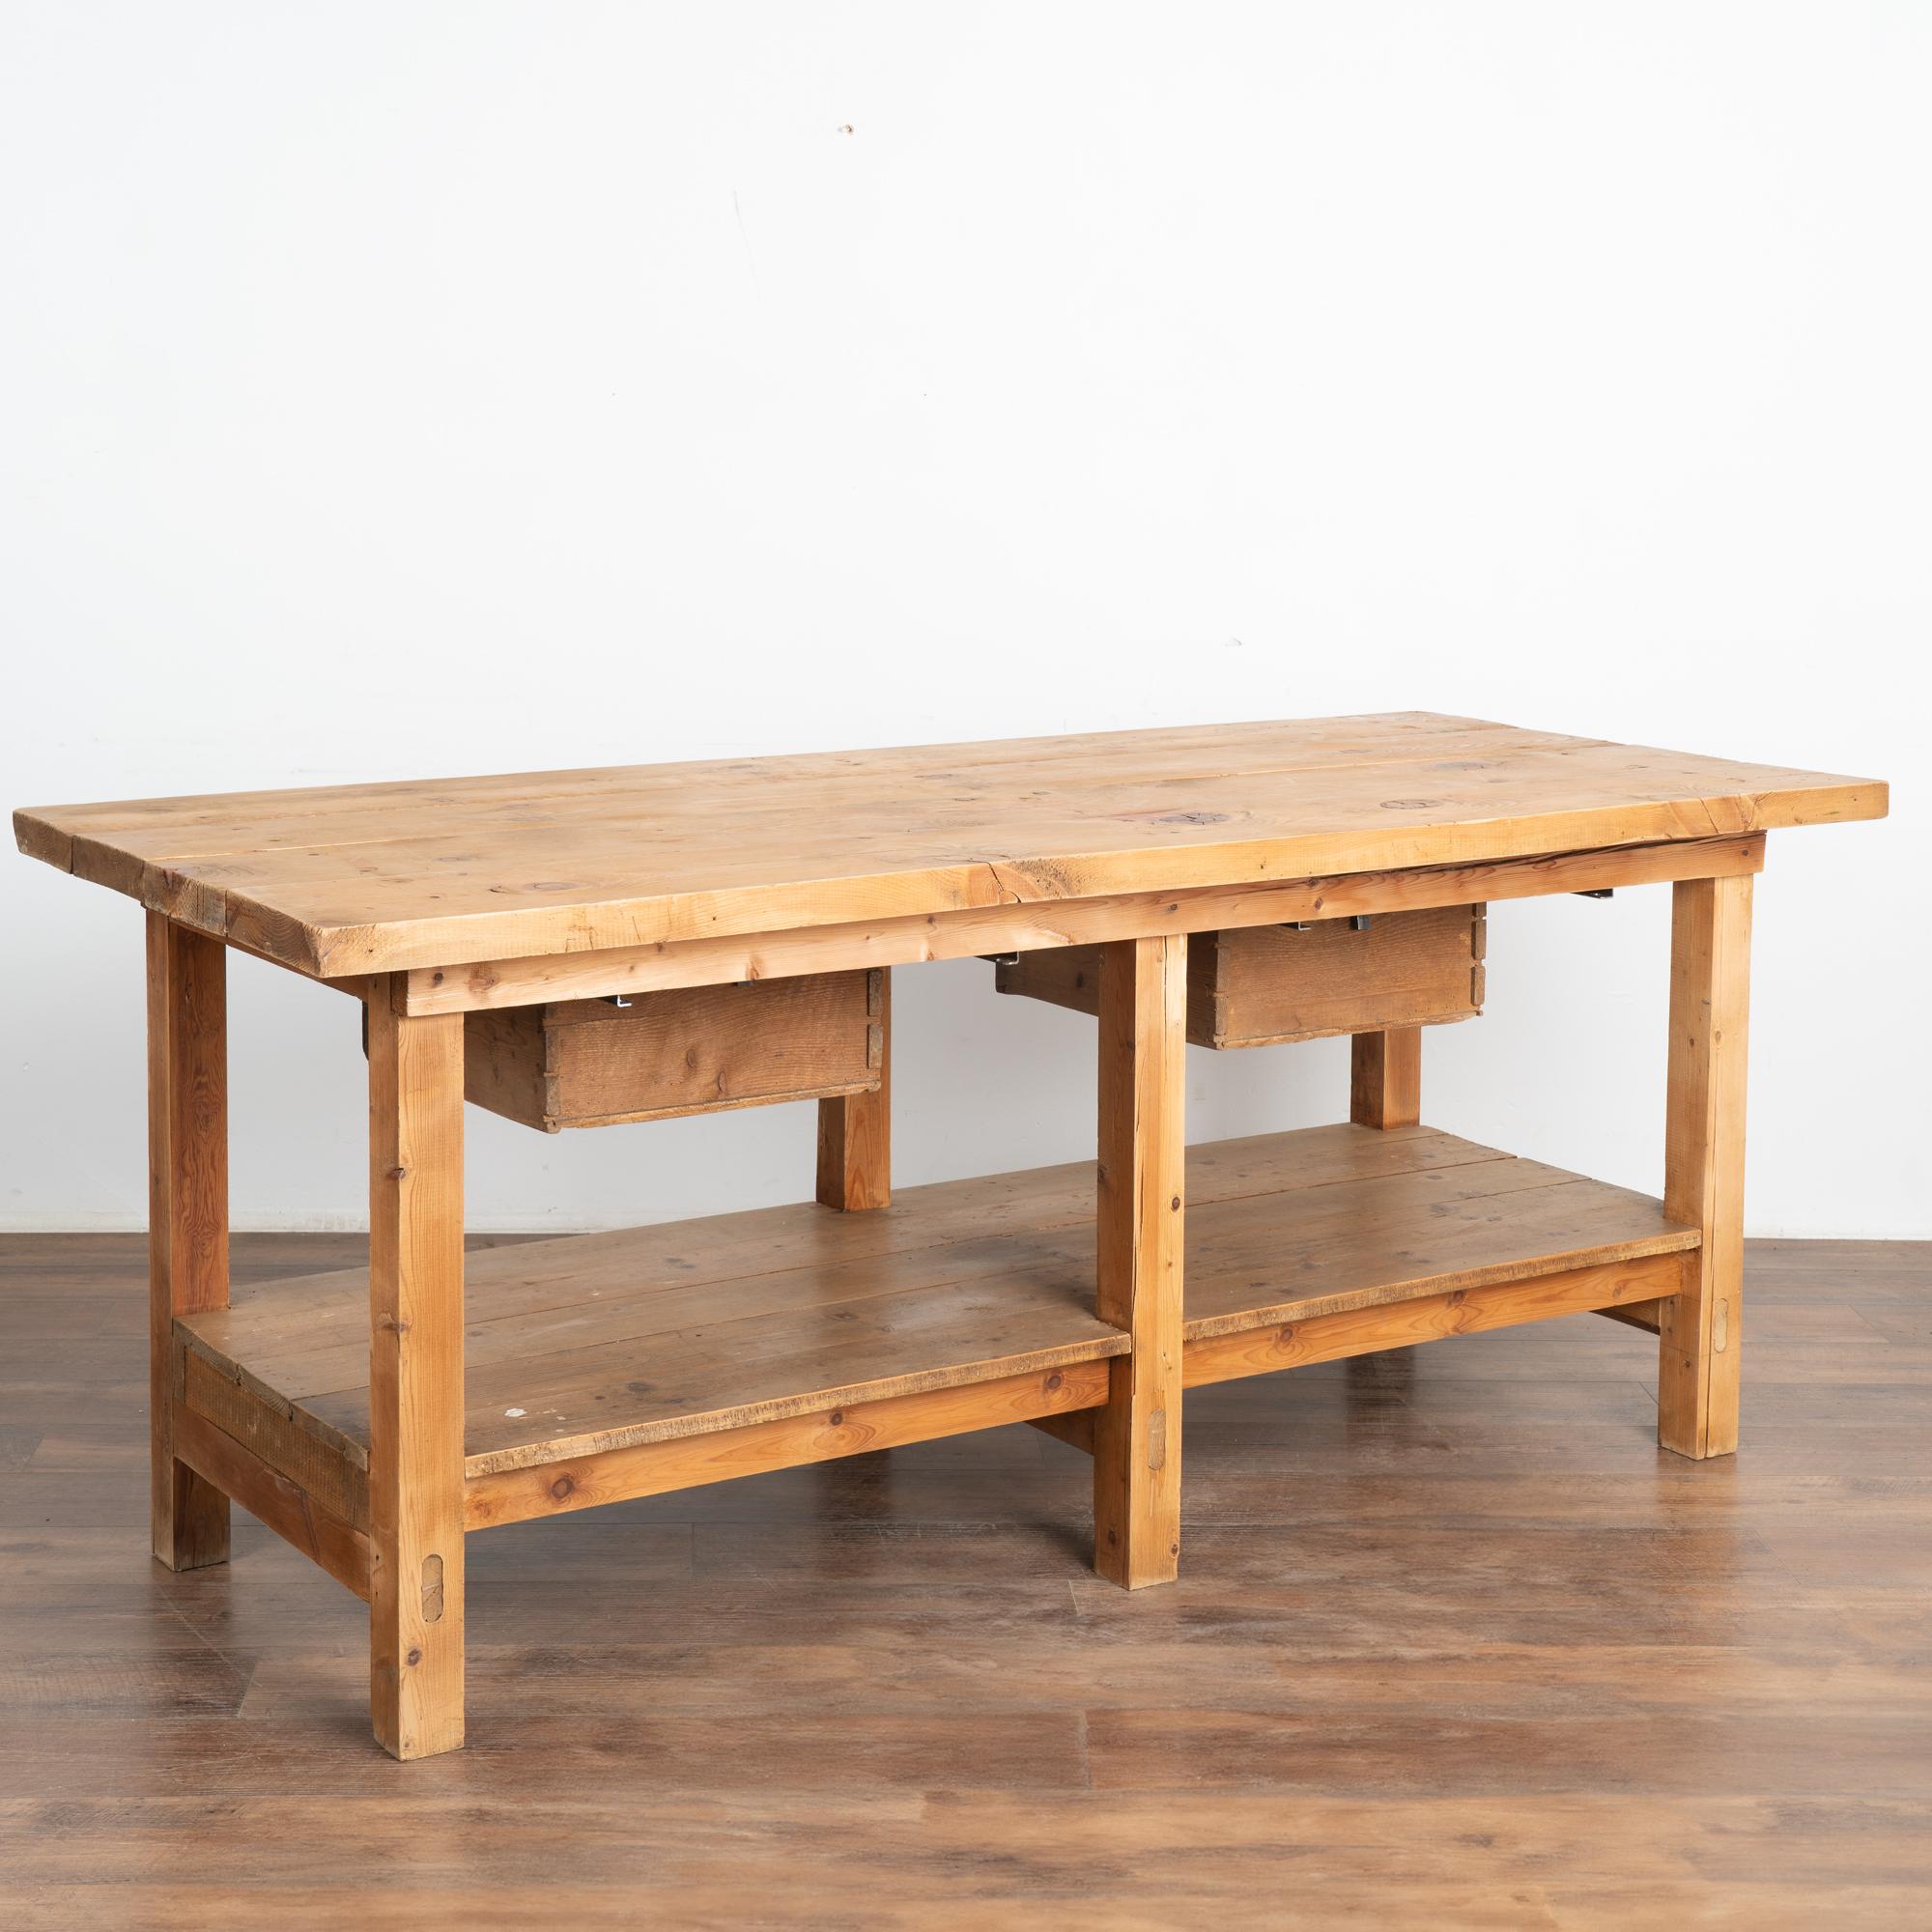 Rustic Work Table With Two Drawers and Shelf, Kitchen Island circa 1920 6